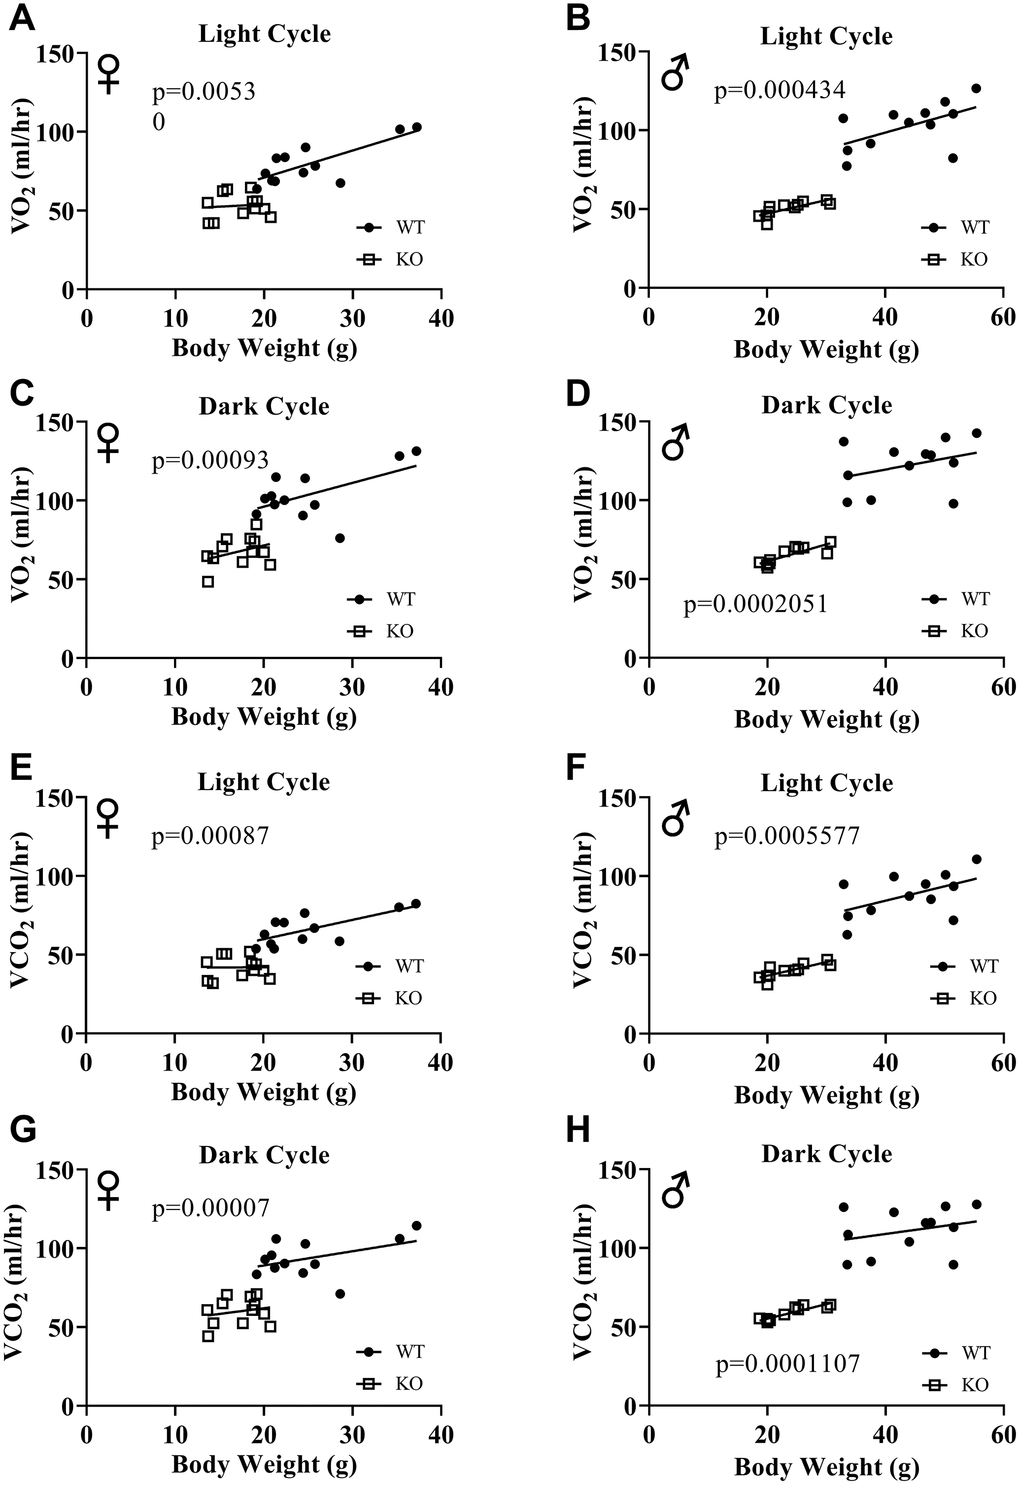 ANCOVA shows that GH-deficiency decreases VO2 and VCO2. Overall averaged VO2 (A–D) and VCO2 (E–H) values are plotted on the y-axis and body weights are plotted on the x-axis. Relationship between body weight and VO2 in female (A, C) and male (B, D) WT and GHRH-/- mice during light cycle (A, B) and dark cycle. (C, D) Relationship between body weight and VCO2 in female (E, G) and male (F, H) WT and GHRH-/- mice in light cycles (E, F) and dark cycles. (G, H) Female WT n=12, GHRH-/- n=12, male WT n=12, GHRH-/- n=11. The WT and GHRH-/- groups were statistically analyzed with ANCOVA method, which was used to calculate p values, shown on each panel.